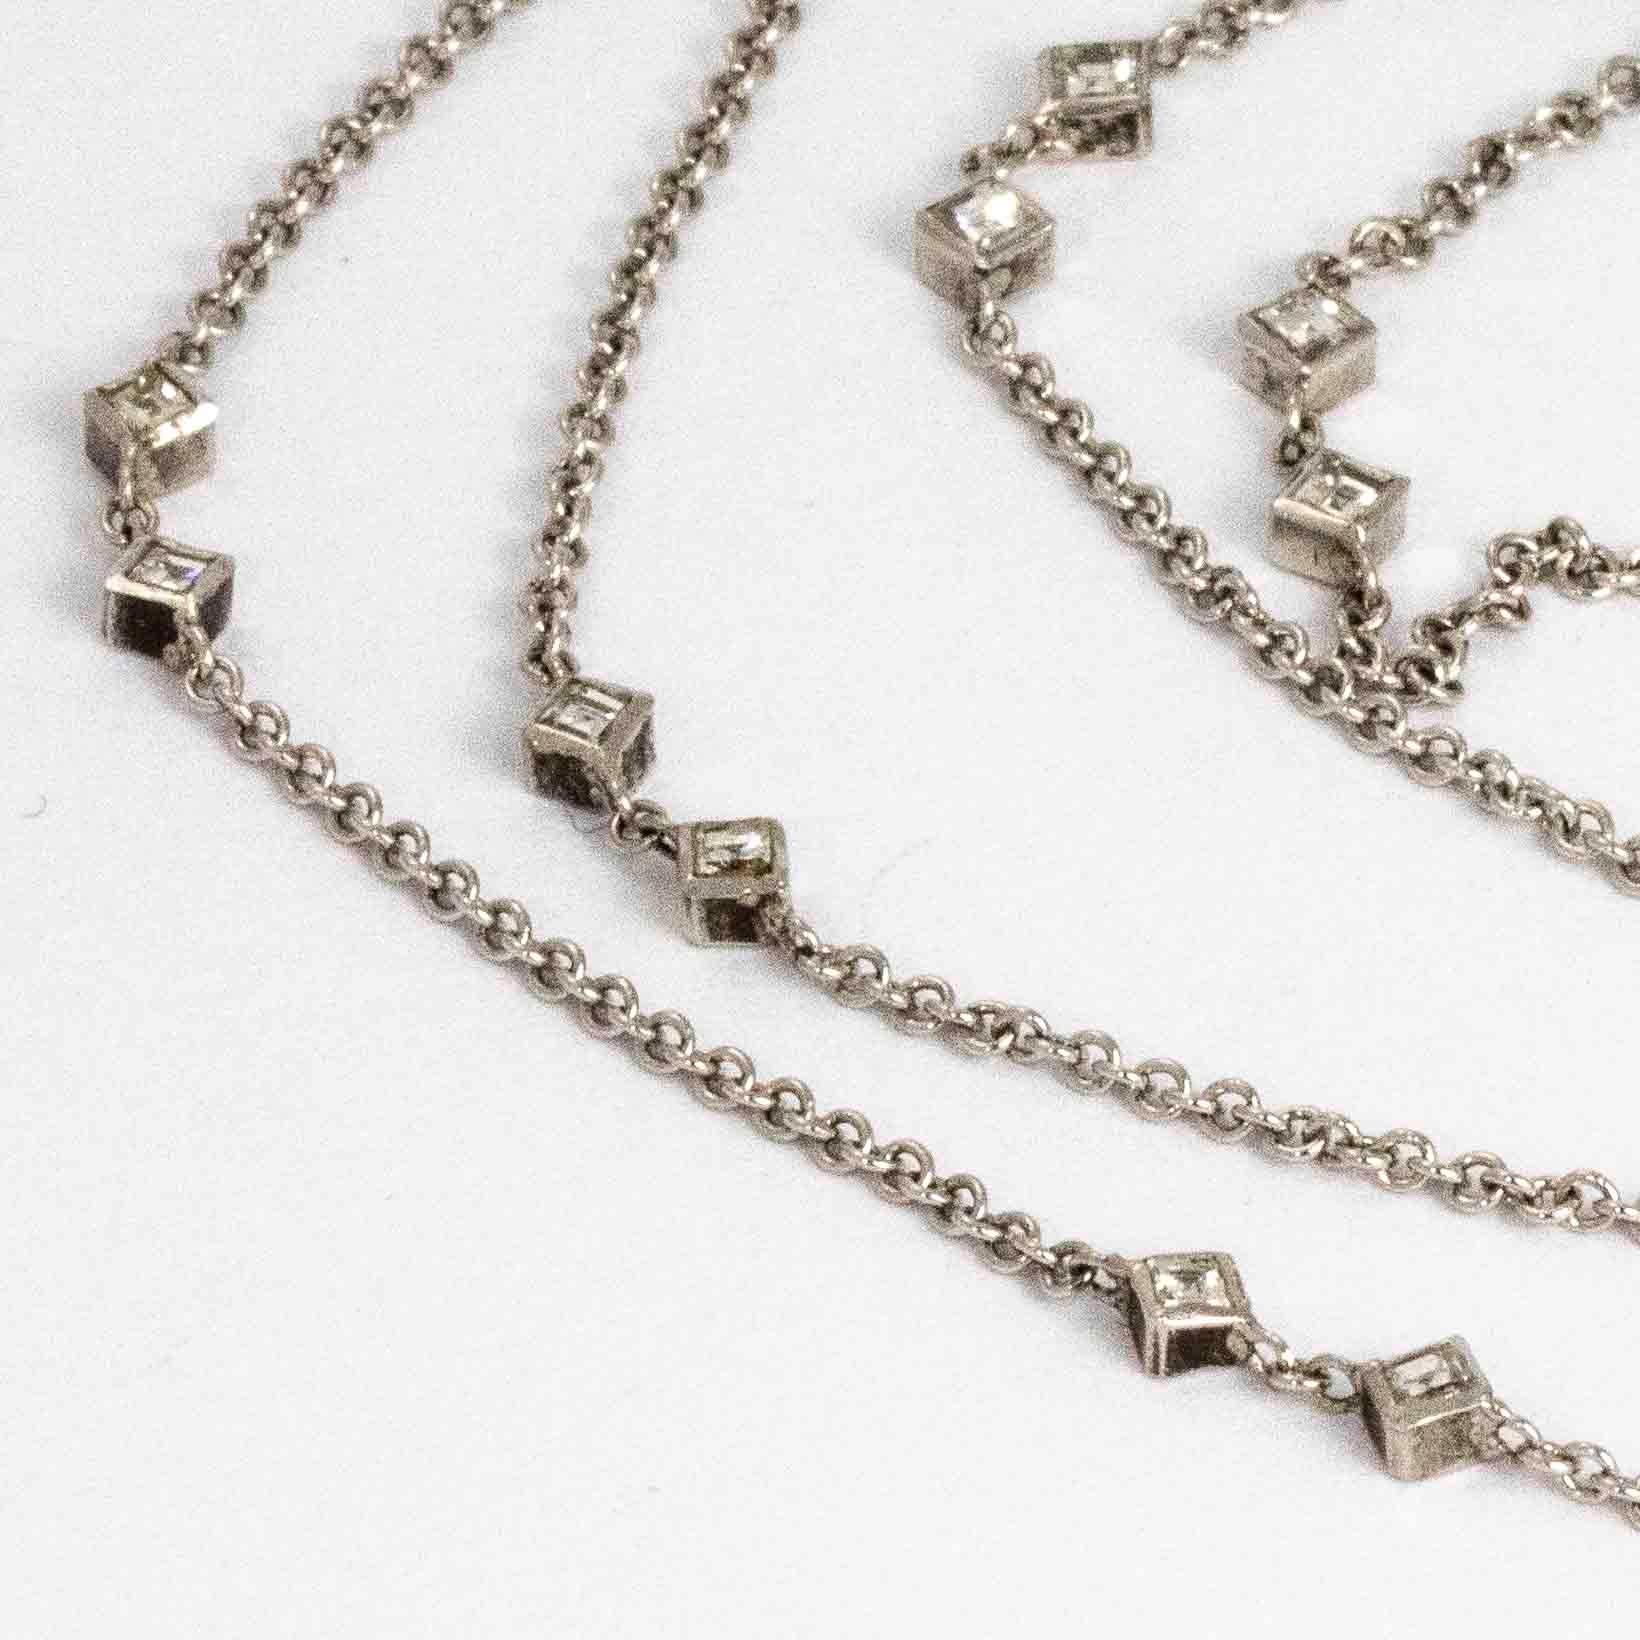 This stylish necklace holds pairs of tiny sparkling diamond points set in square settings. Modelled in 18ct gold and made in Italy.

Length: 60cm 